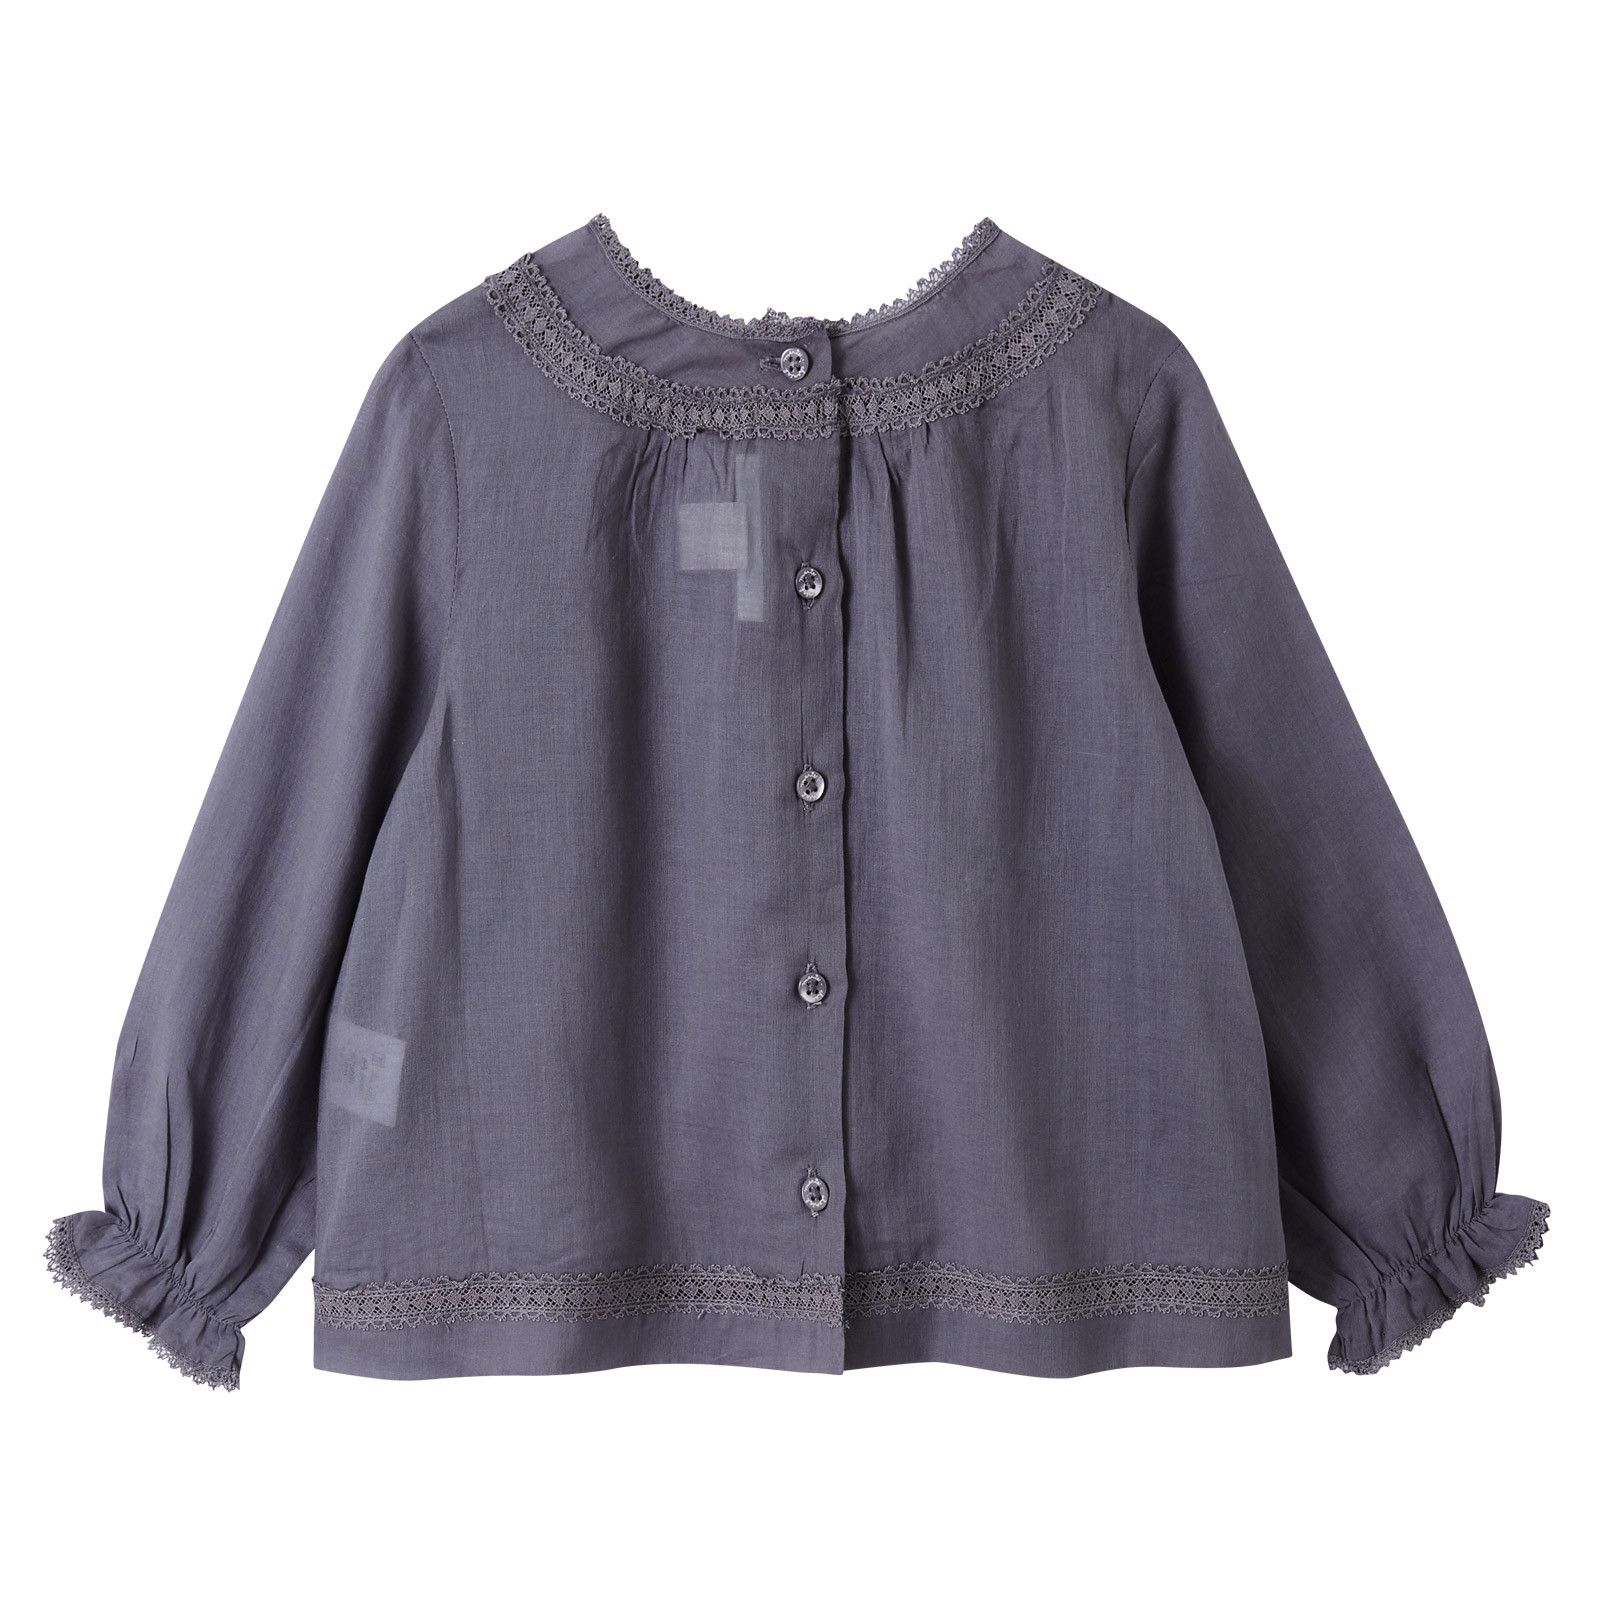 Baby Girls Grey Folk Blouse With Frilly Cuffs - CÉMAROSE | Children's Fashion Store - 2